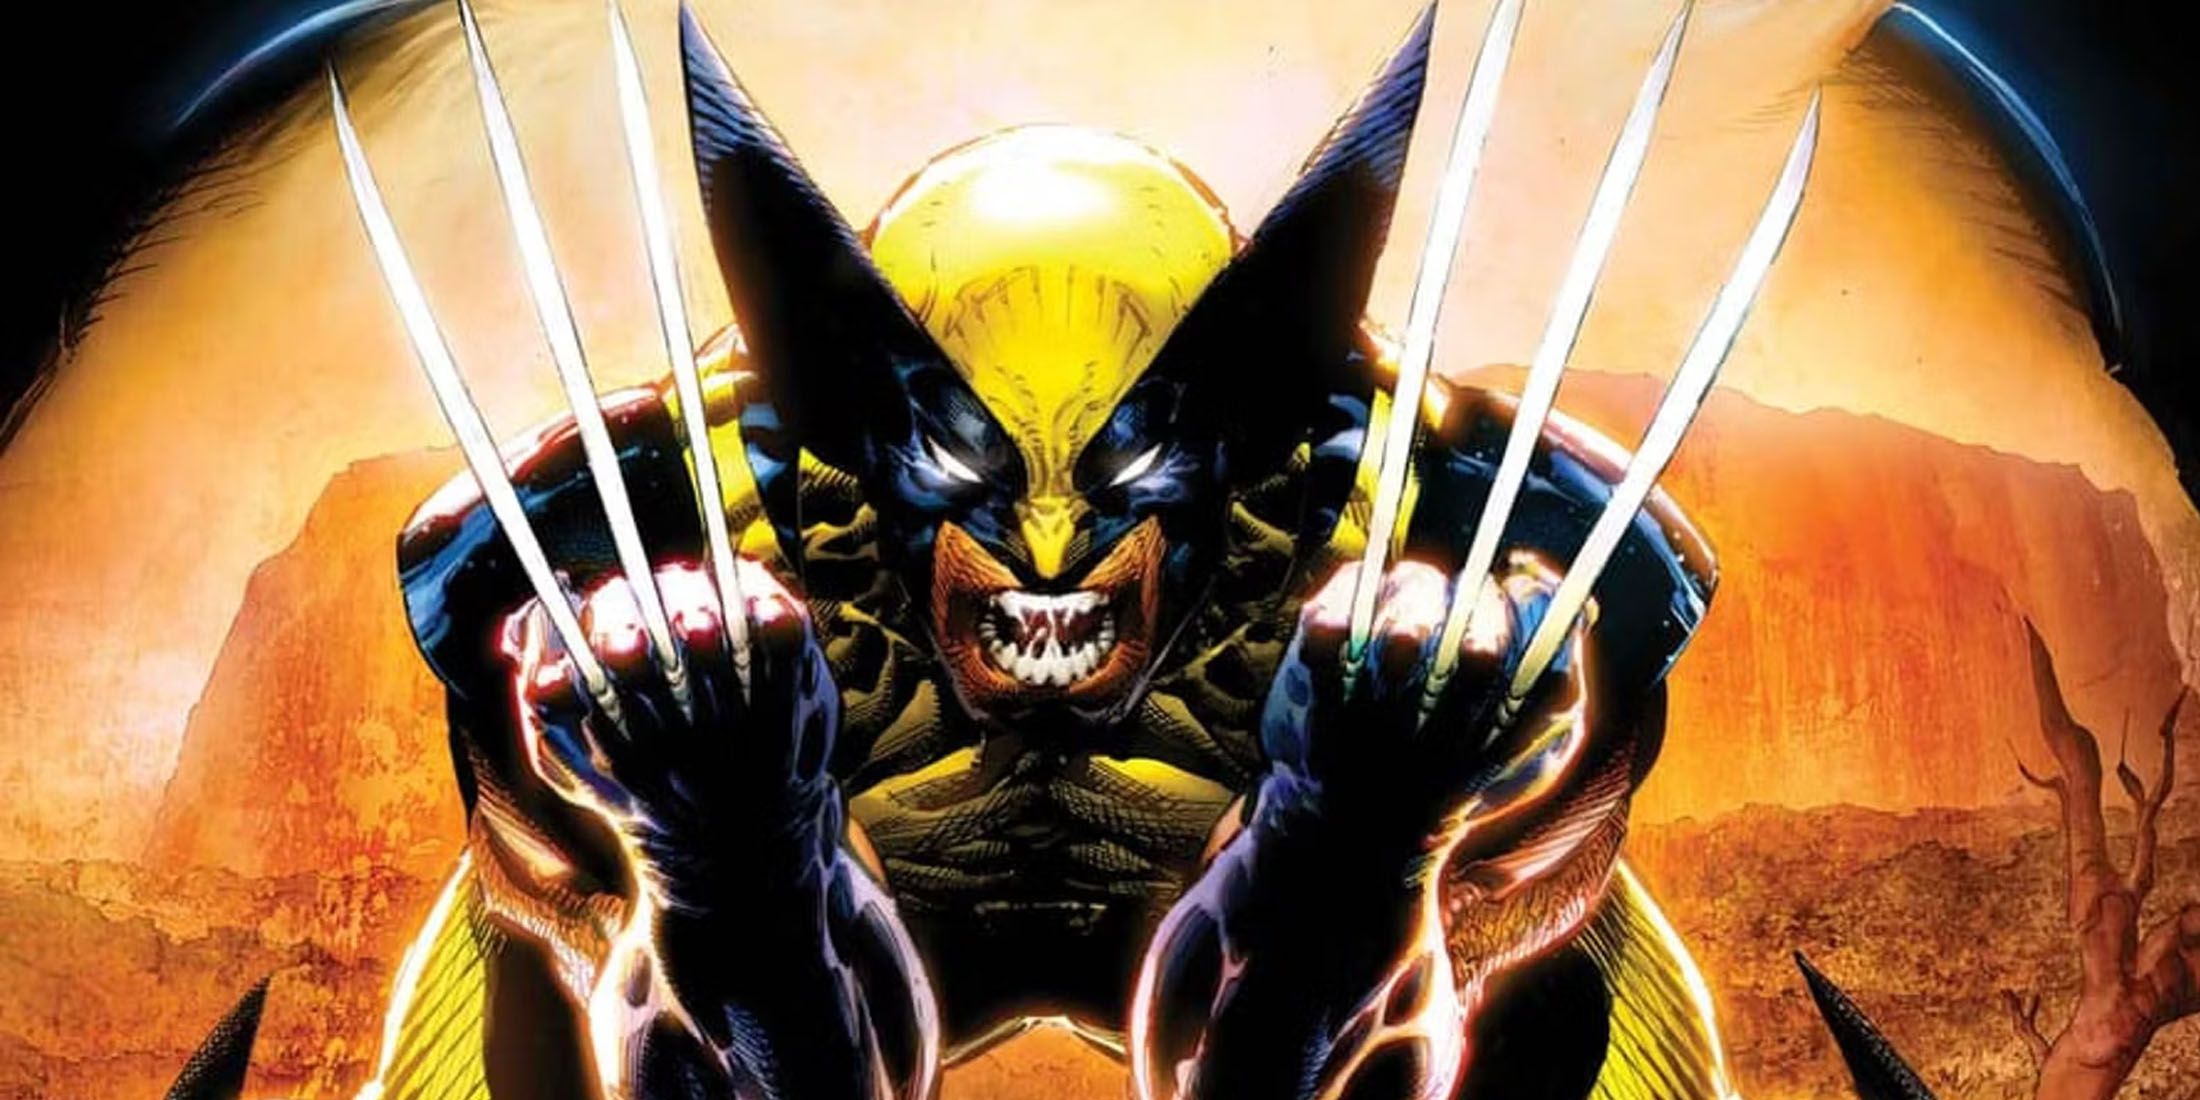 An image of Wolverine extending his claws in his classic yellow and blue costume.